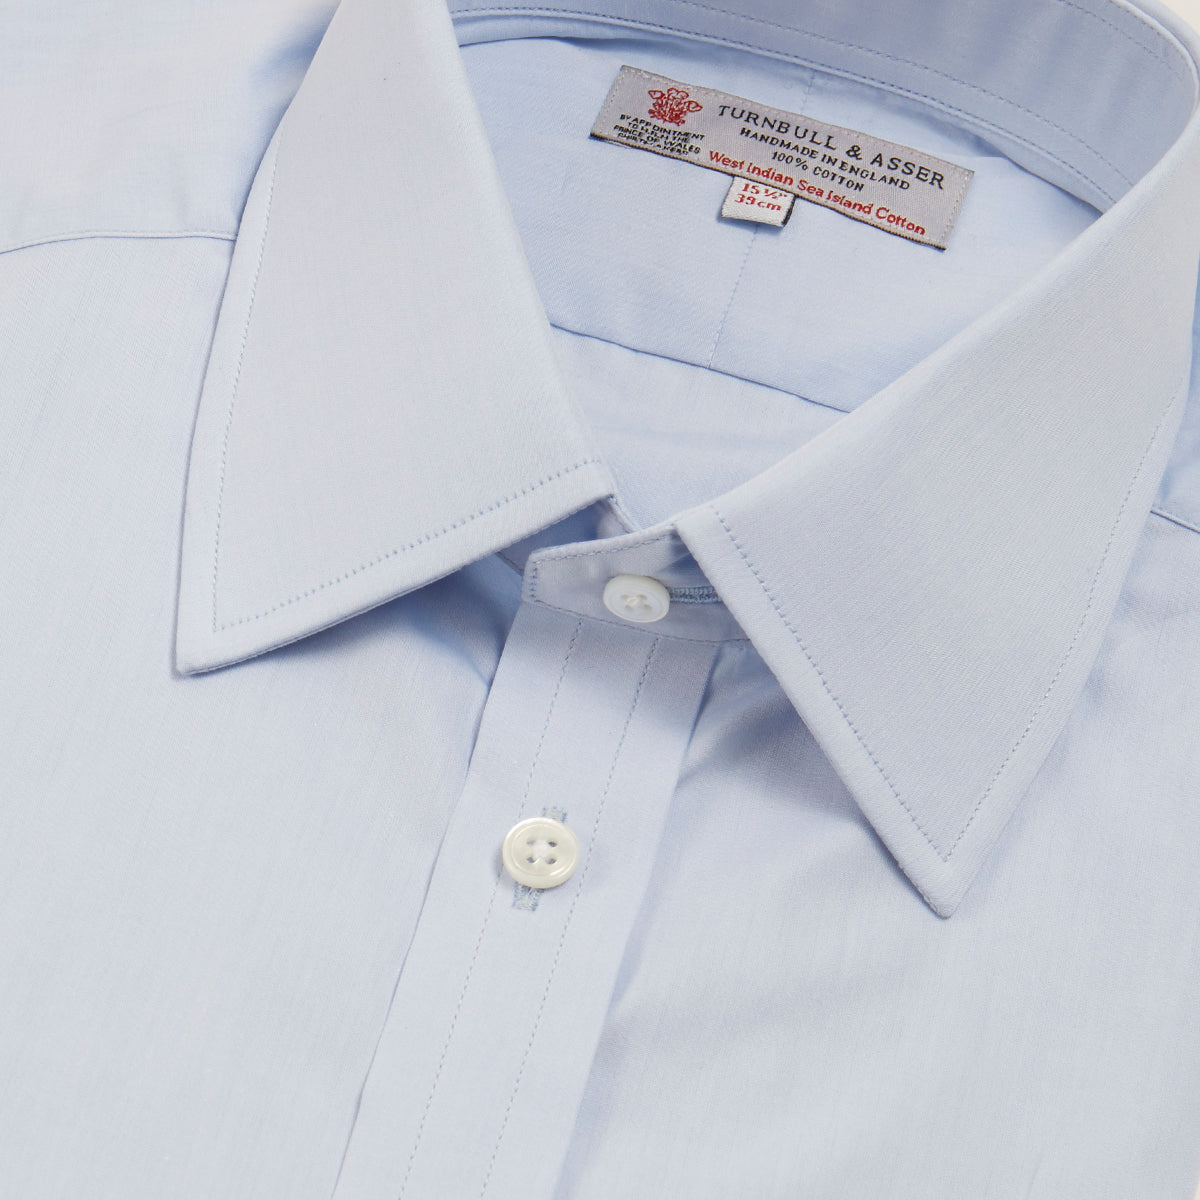 Blue West Indian Sea Island Cotton Shirt with T&A Collar and Double Cuffs